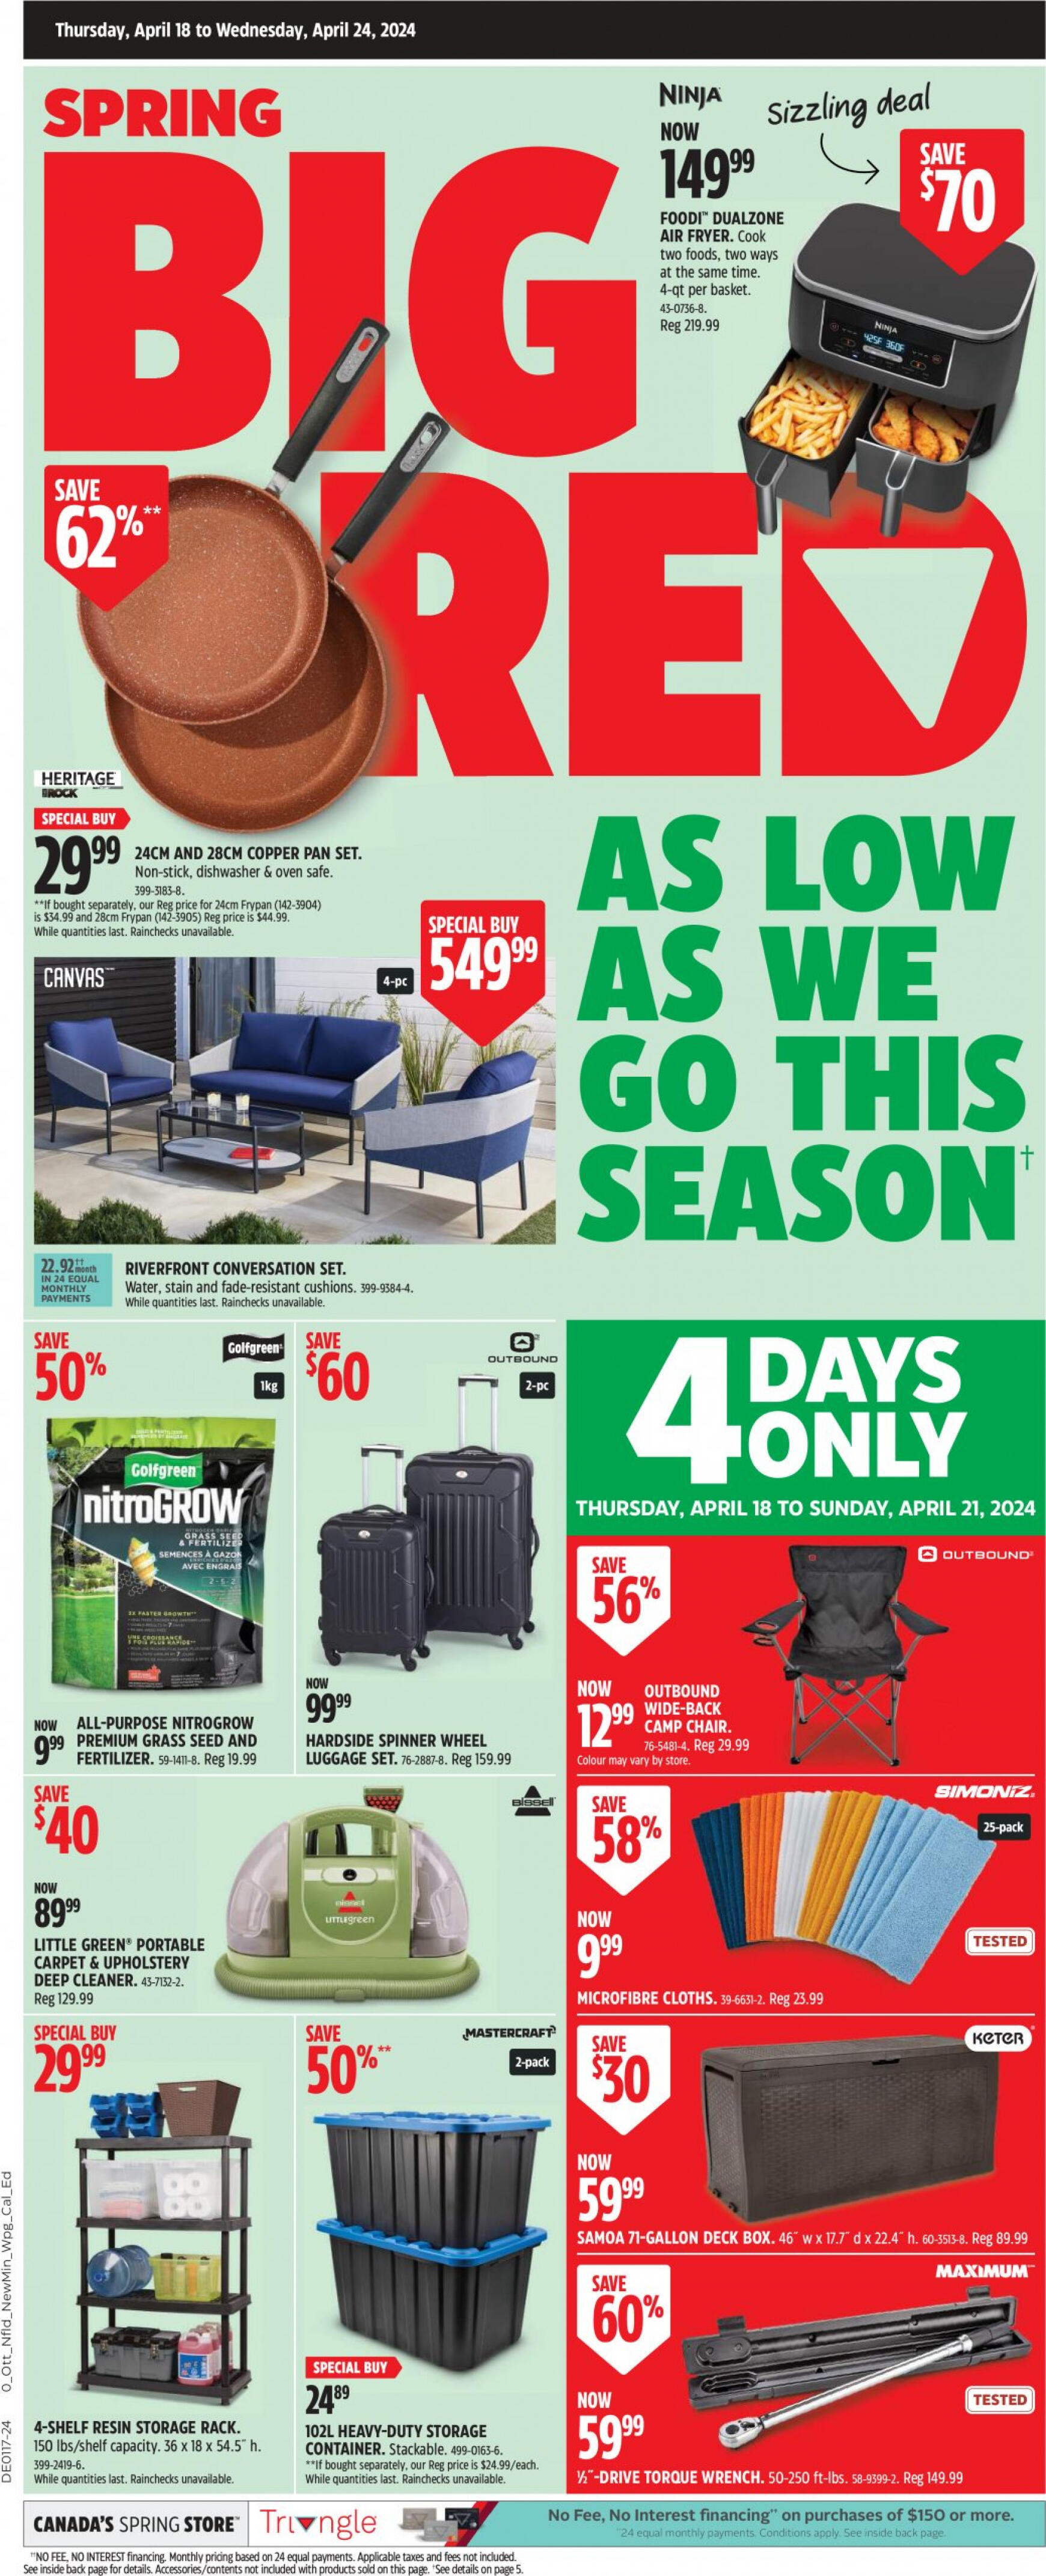 canadian-tire - Canadian Tire flyer current 18.04. - 24.04.